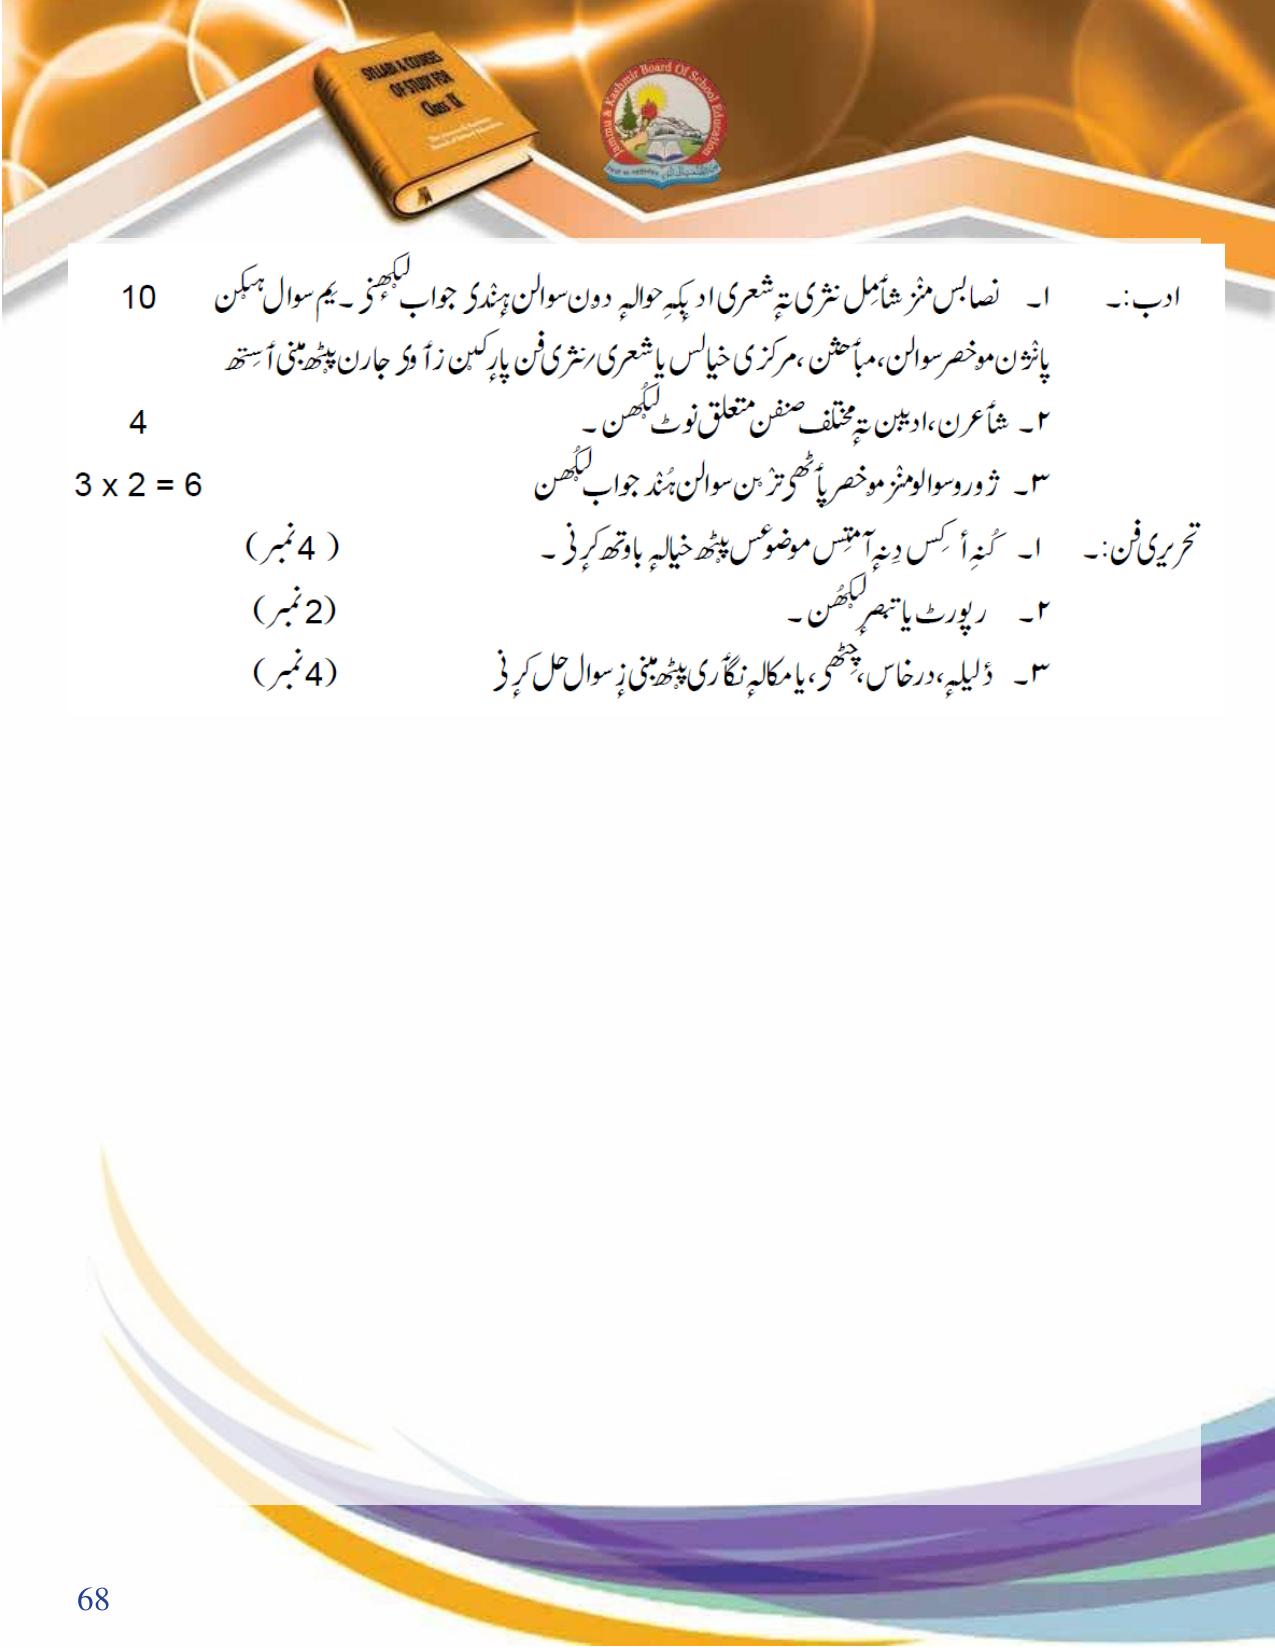 JKBOSE Syllabus for 9th class - Page 69